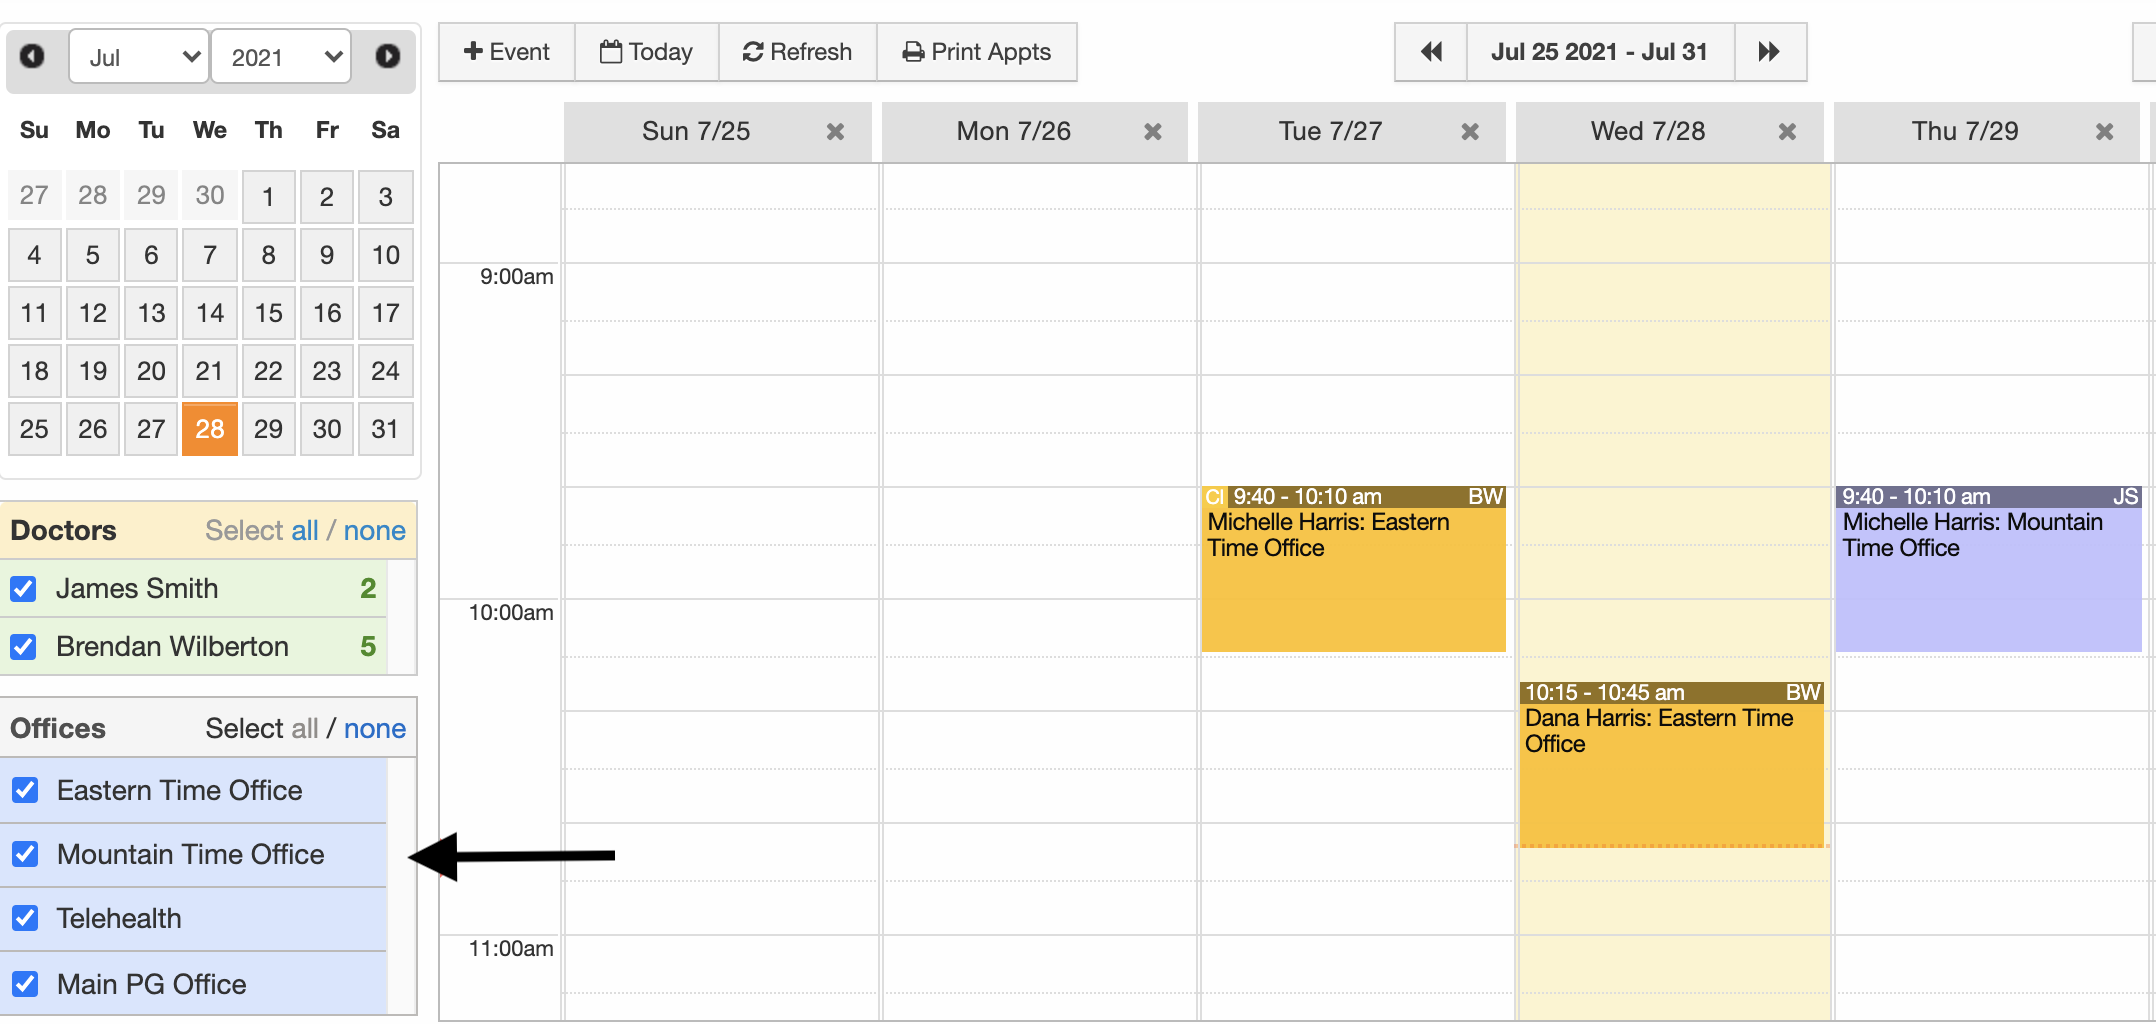 Timezone_Offices_Calendar_View.png